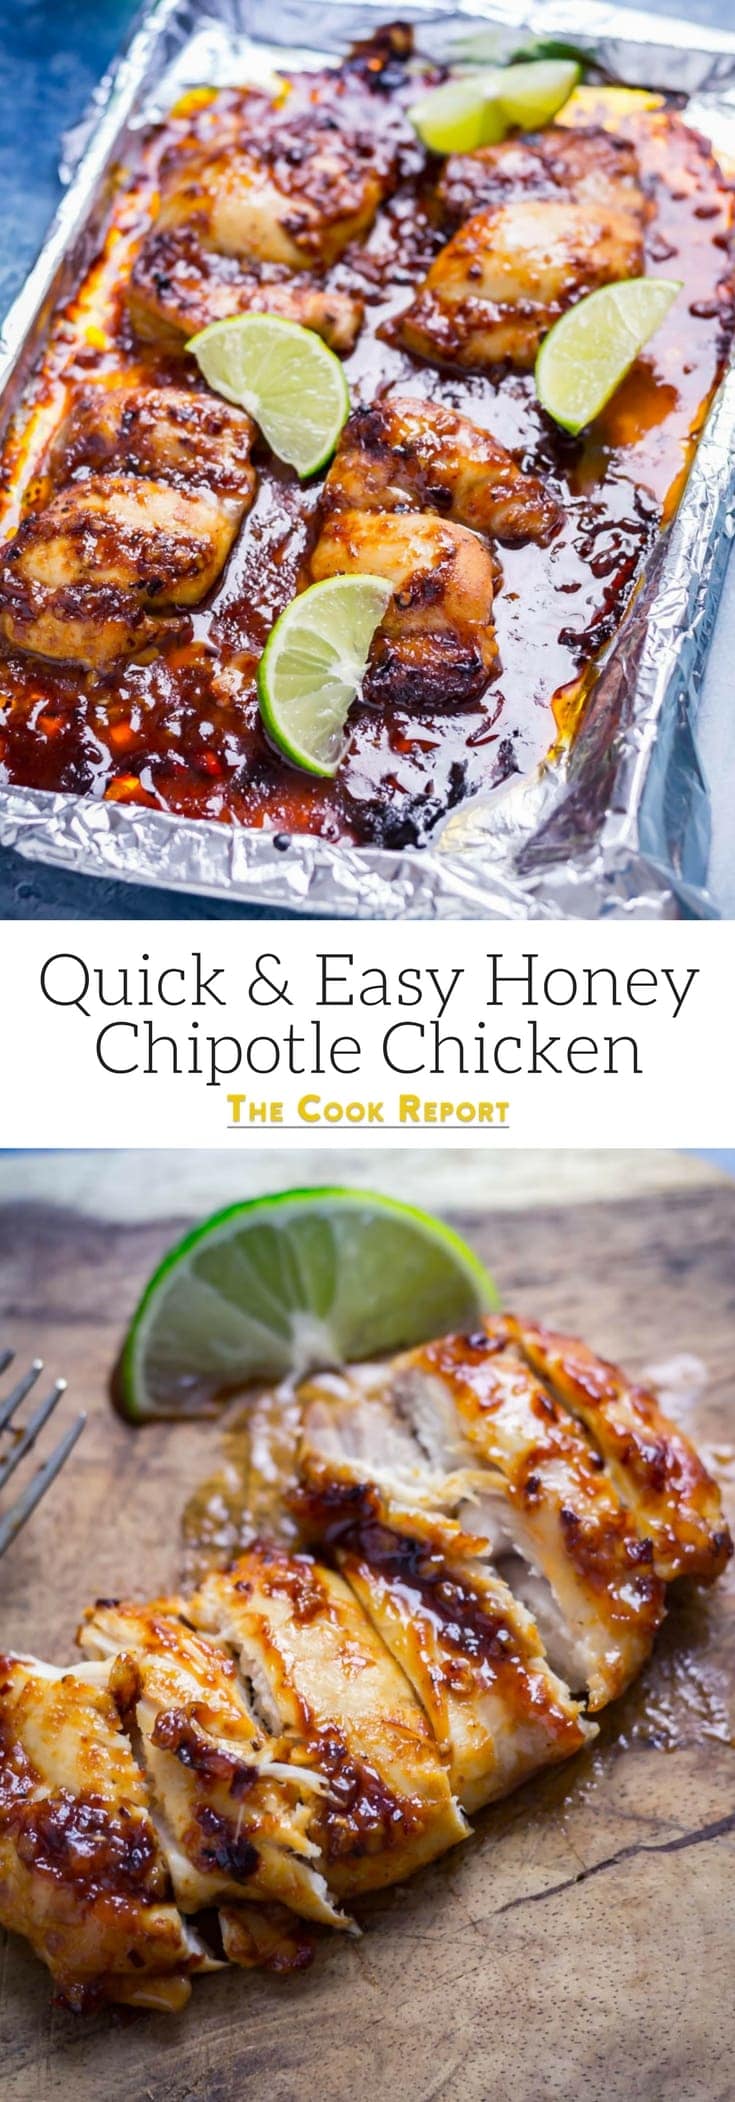 Quick & Easy Honey Chipotle Chicken. This honey chipotle chicken is the perfect combination of sweet and spicy. It's so easy to make and is super versatile, serve it in wraps, sandwiches or with salad...the possibilities are endless! #honey #chipotle #chicken #recipe